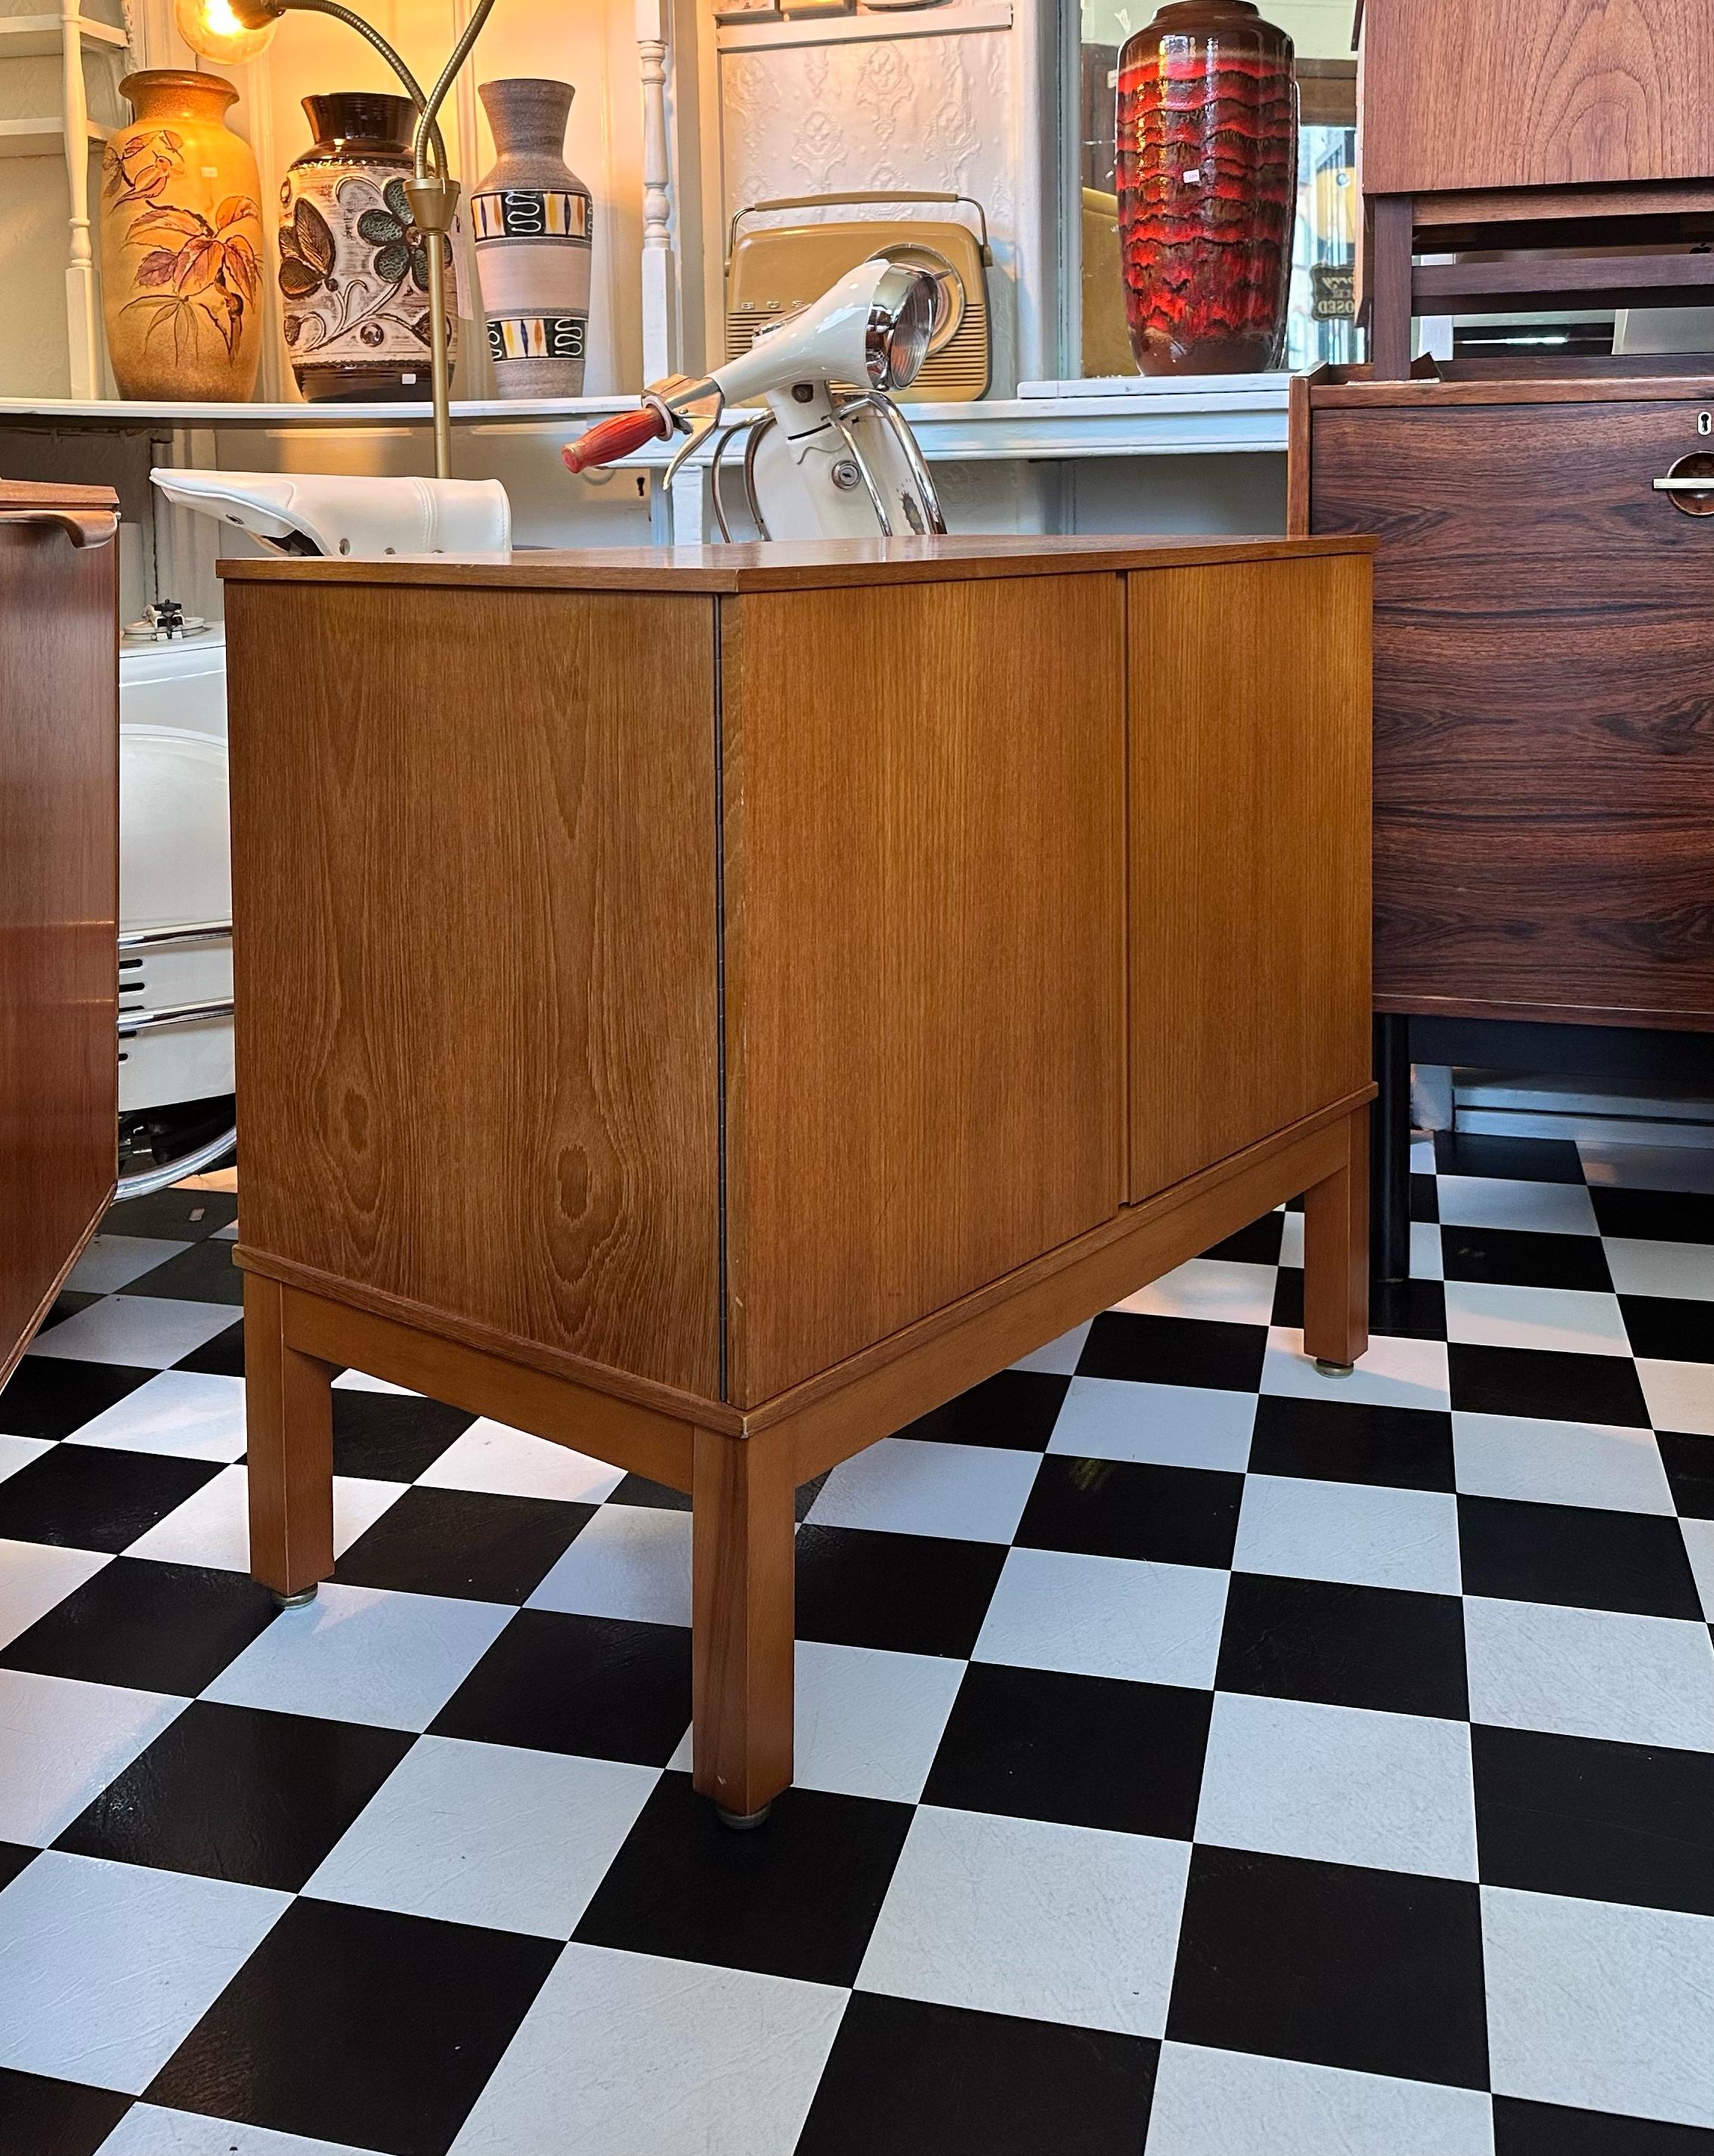 We’re happy to provide our own competitive shipping quotes with trusted couriers. Please message us with your postcode for a more accurate price. Thank you.

Stunning mid century modern vinyl / media / record cabinet.
Golden teak finish, with